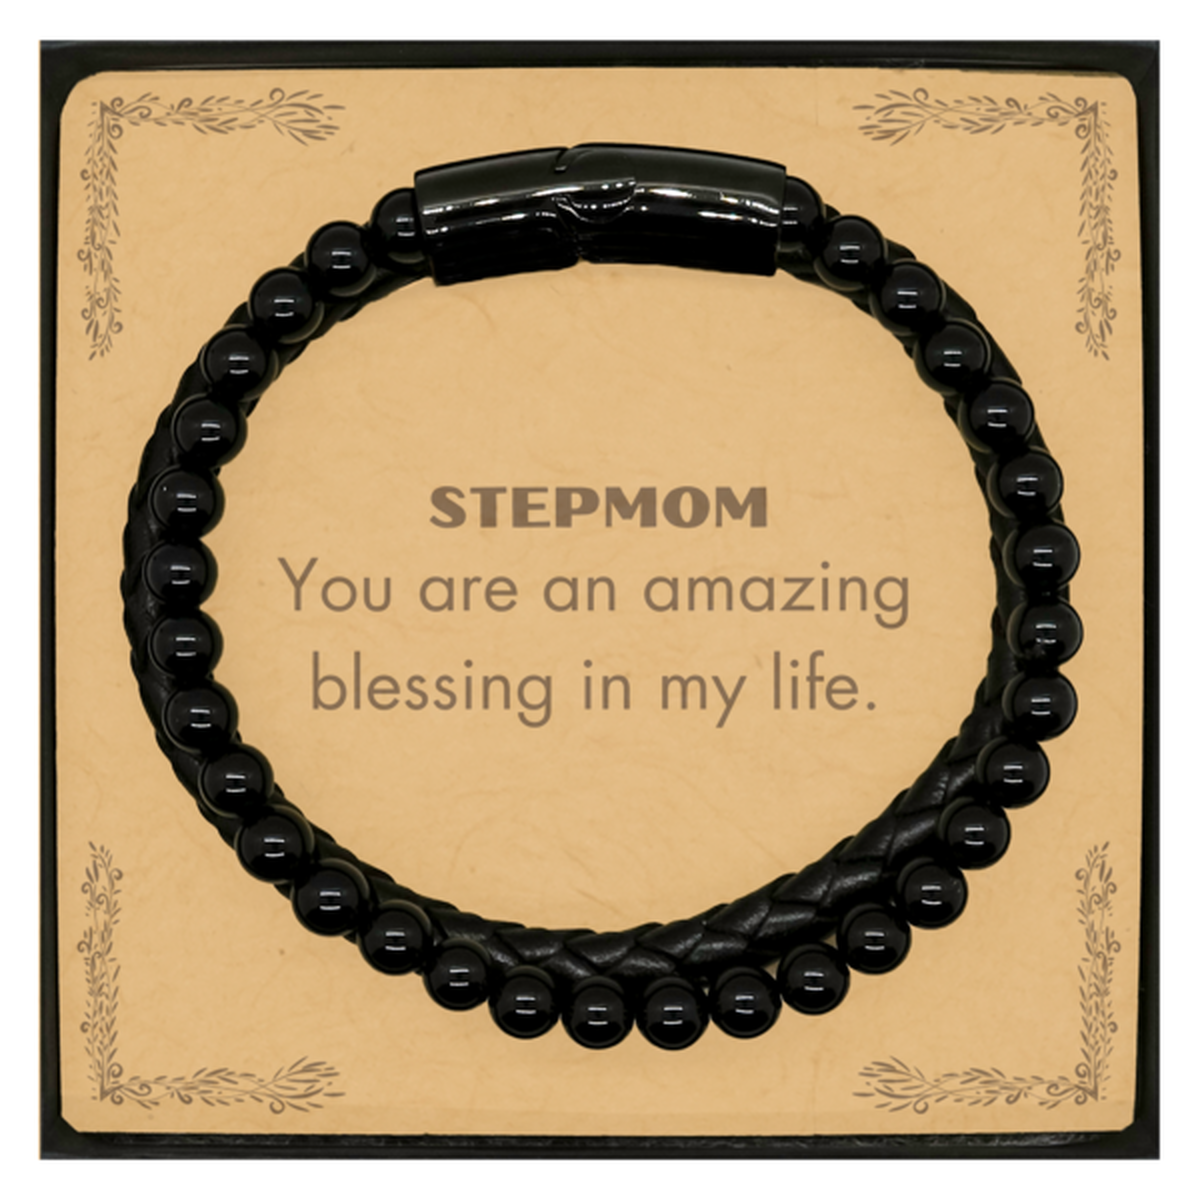 Stepmom Stone Leather Bracelets, You are an amazing blessing in my life, Thank You Gifts For Stepmom, Inspirational Birthday Christmas Unique Gifts For Stepmom